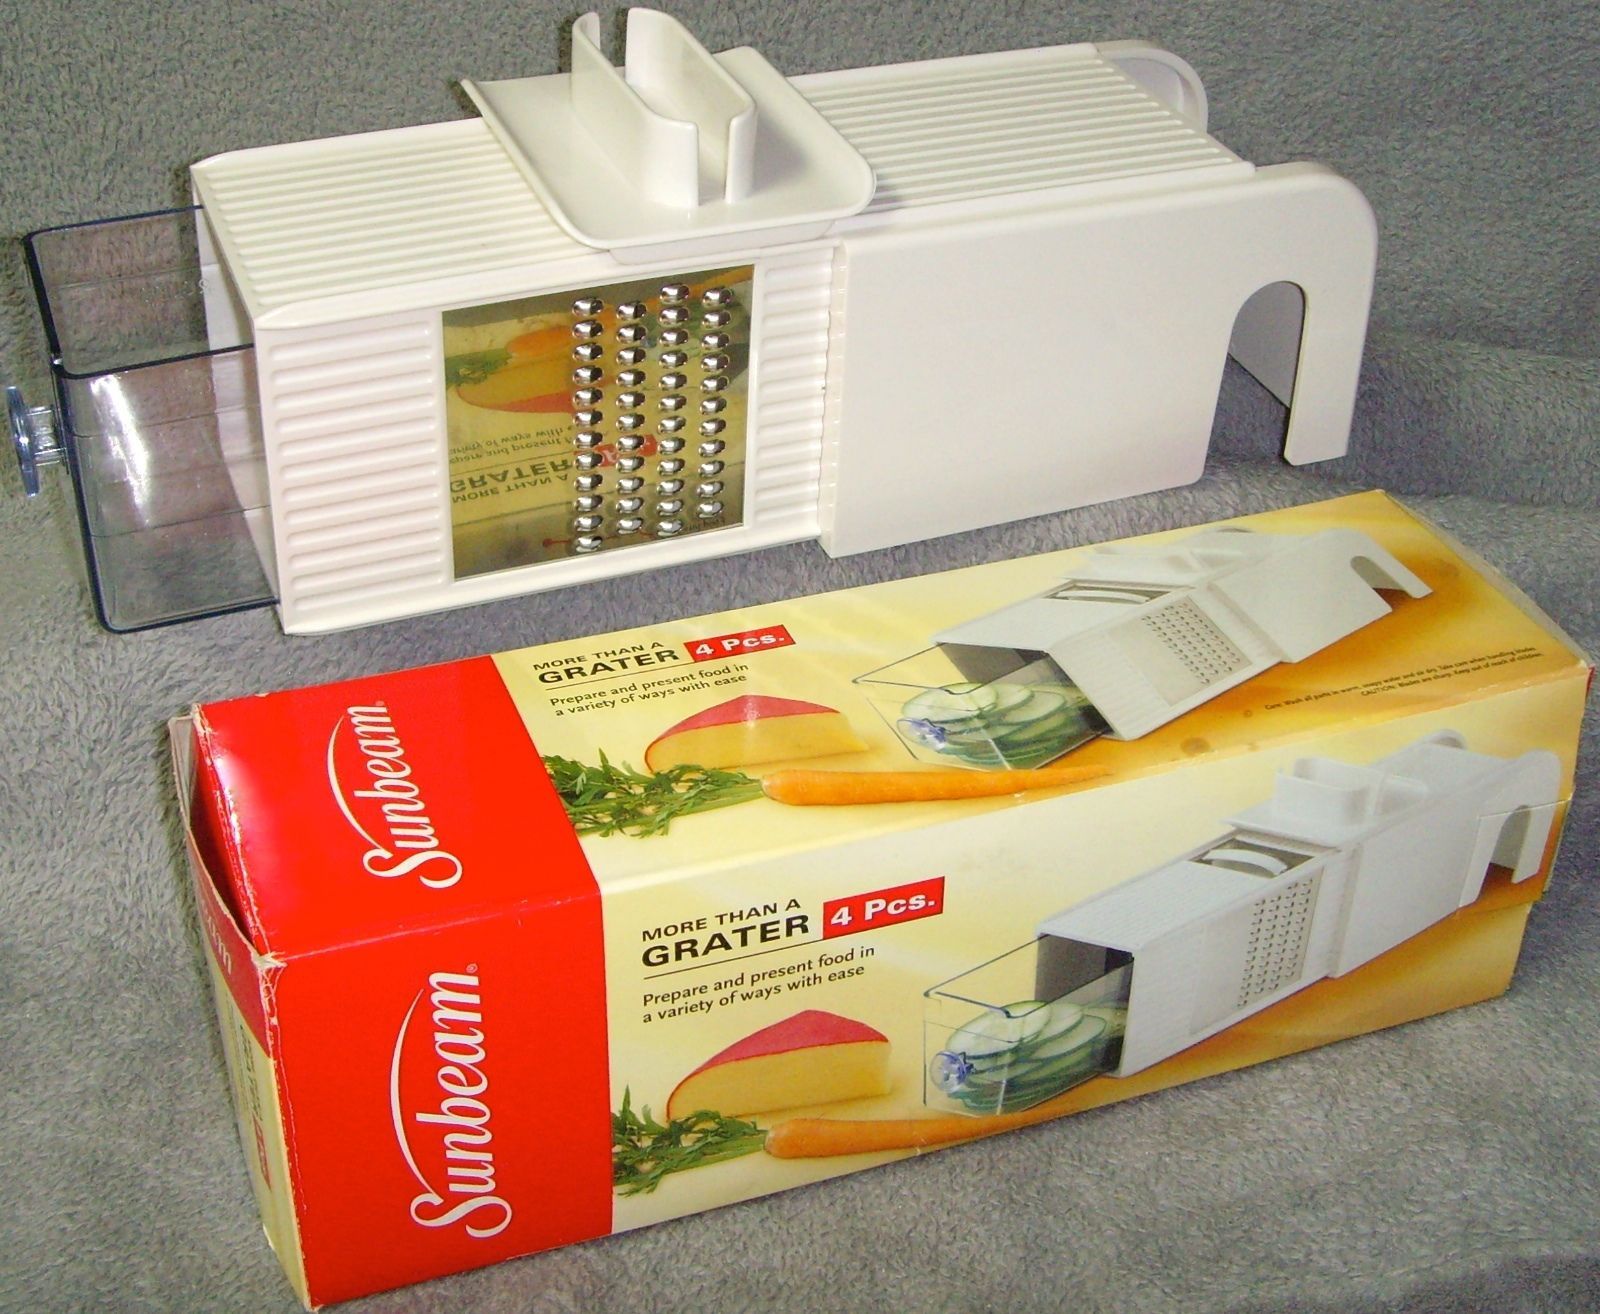 New in Box•Sunbeam•More Than A Grater•4 Piece•Grate/Slice/Shred/Chop•Model 63025 - $14.99